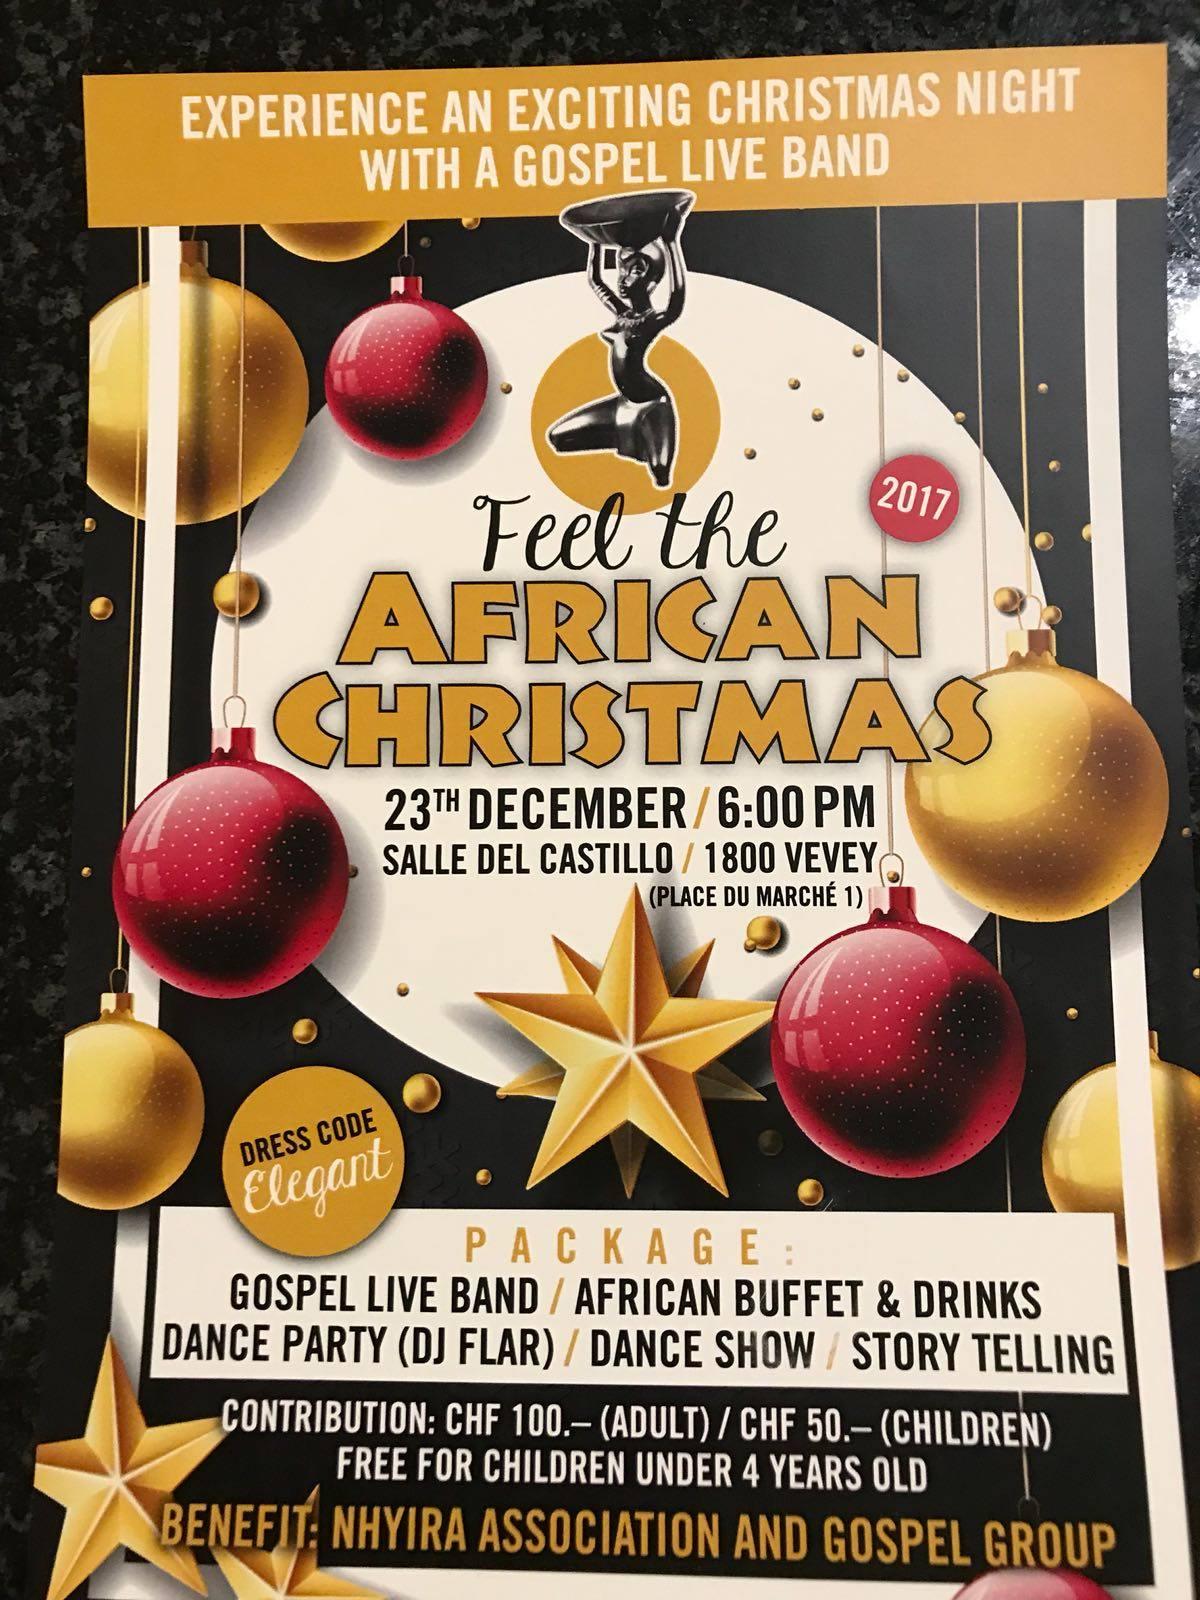 Feel The African Christmas Flyer "Experience an exciting Christmas night with a Gospel Live Band"